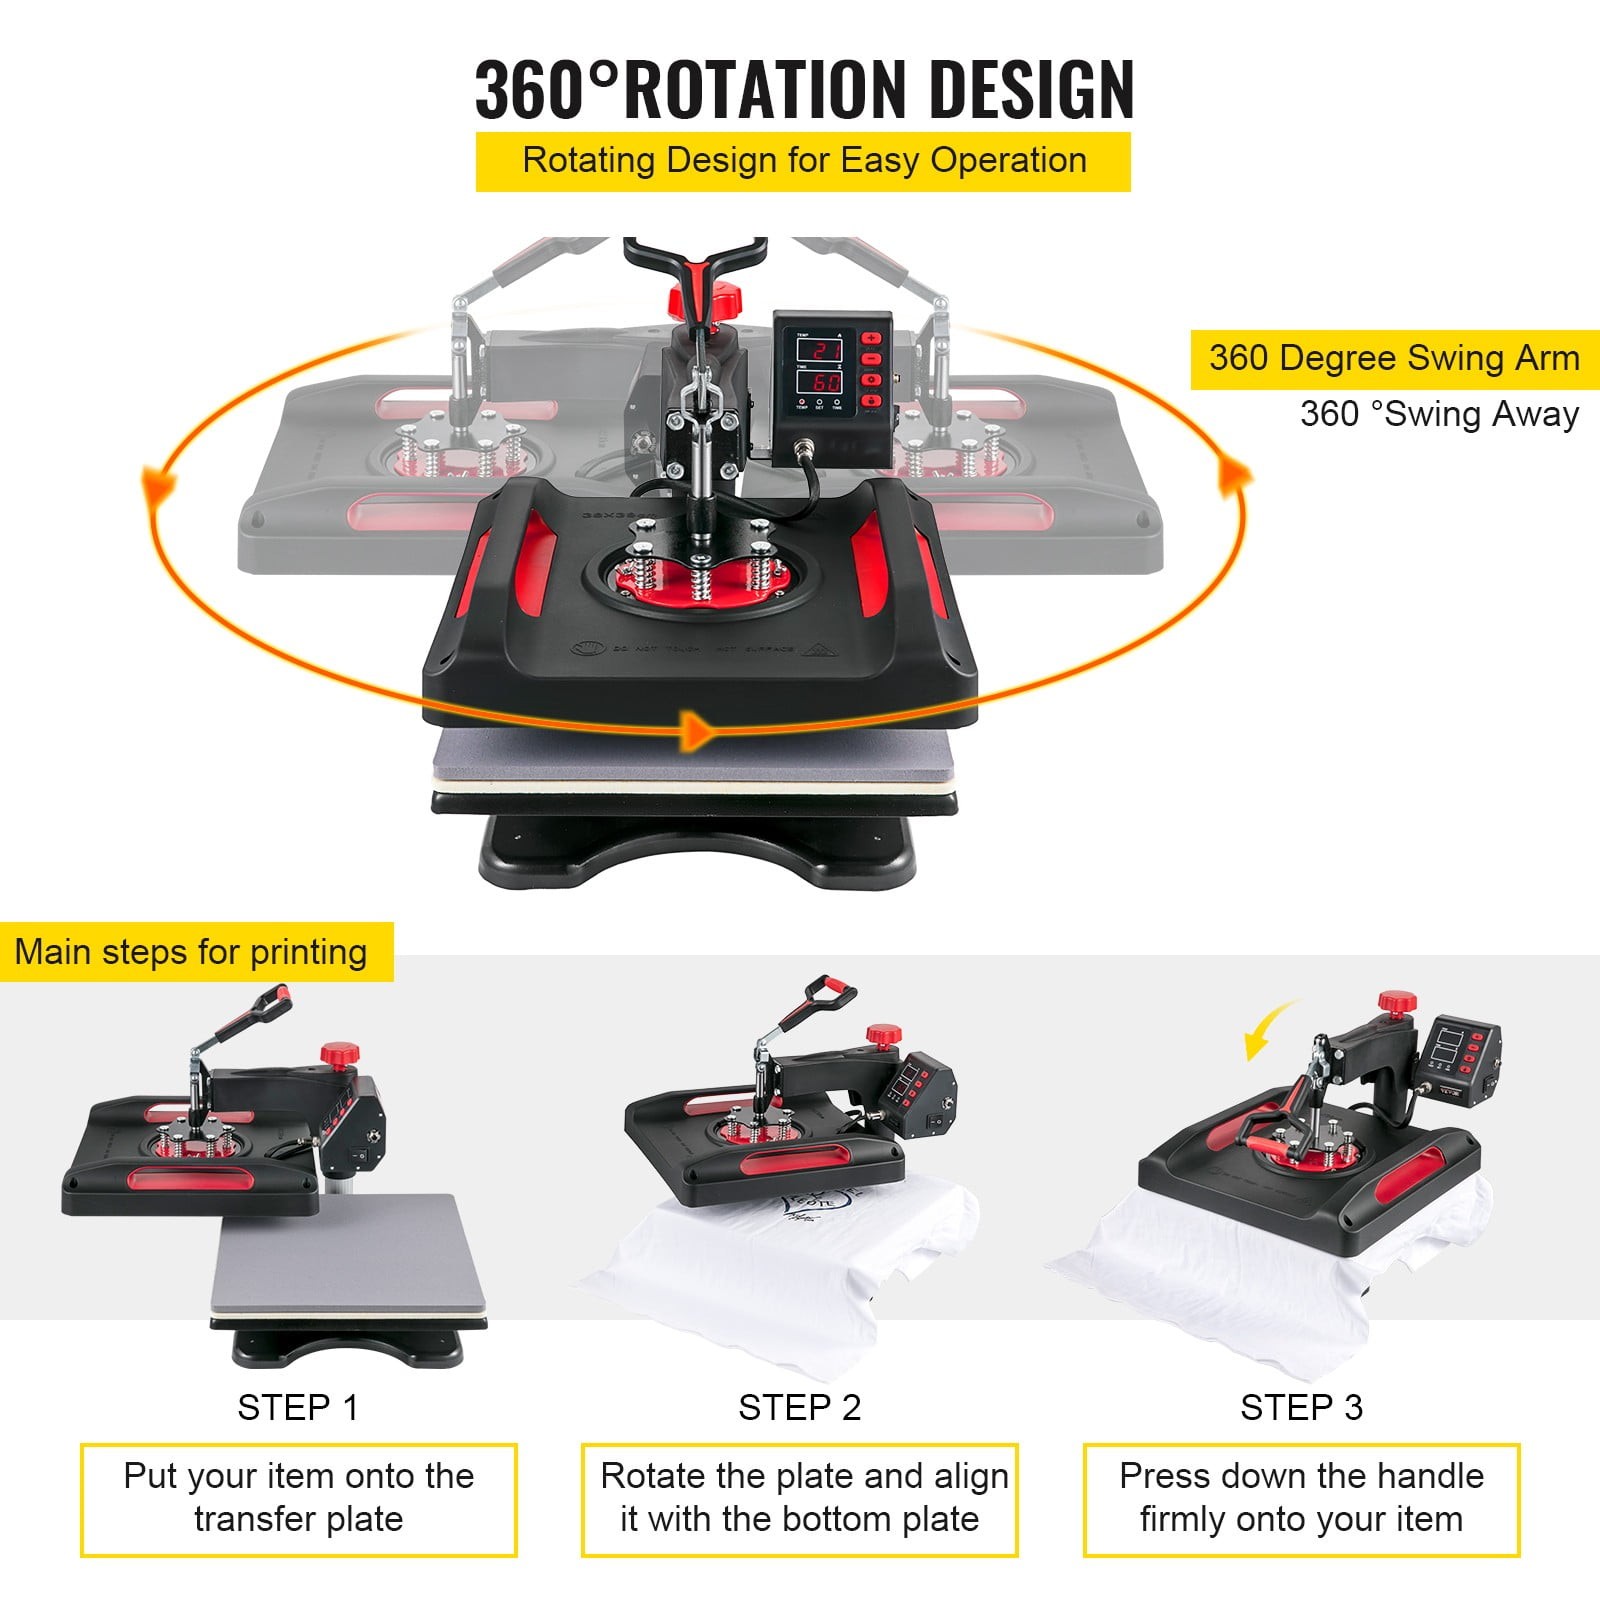 Red 8-in-1 Heat Press Machine, 15 x 15 Inches Sublimation Transfer Printer,  Digital Precise LCD Control Printing, 360 Swing Away Vinyl Transfer